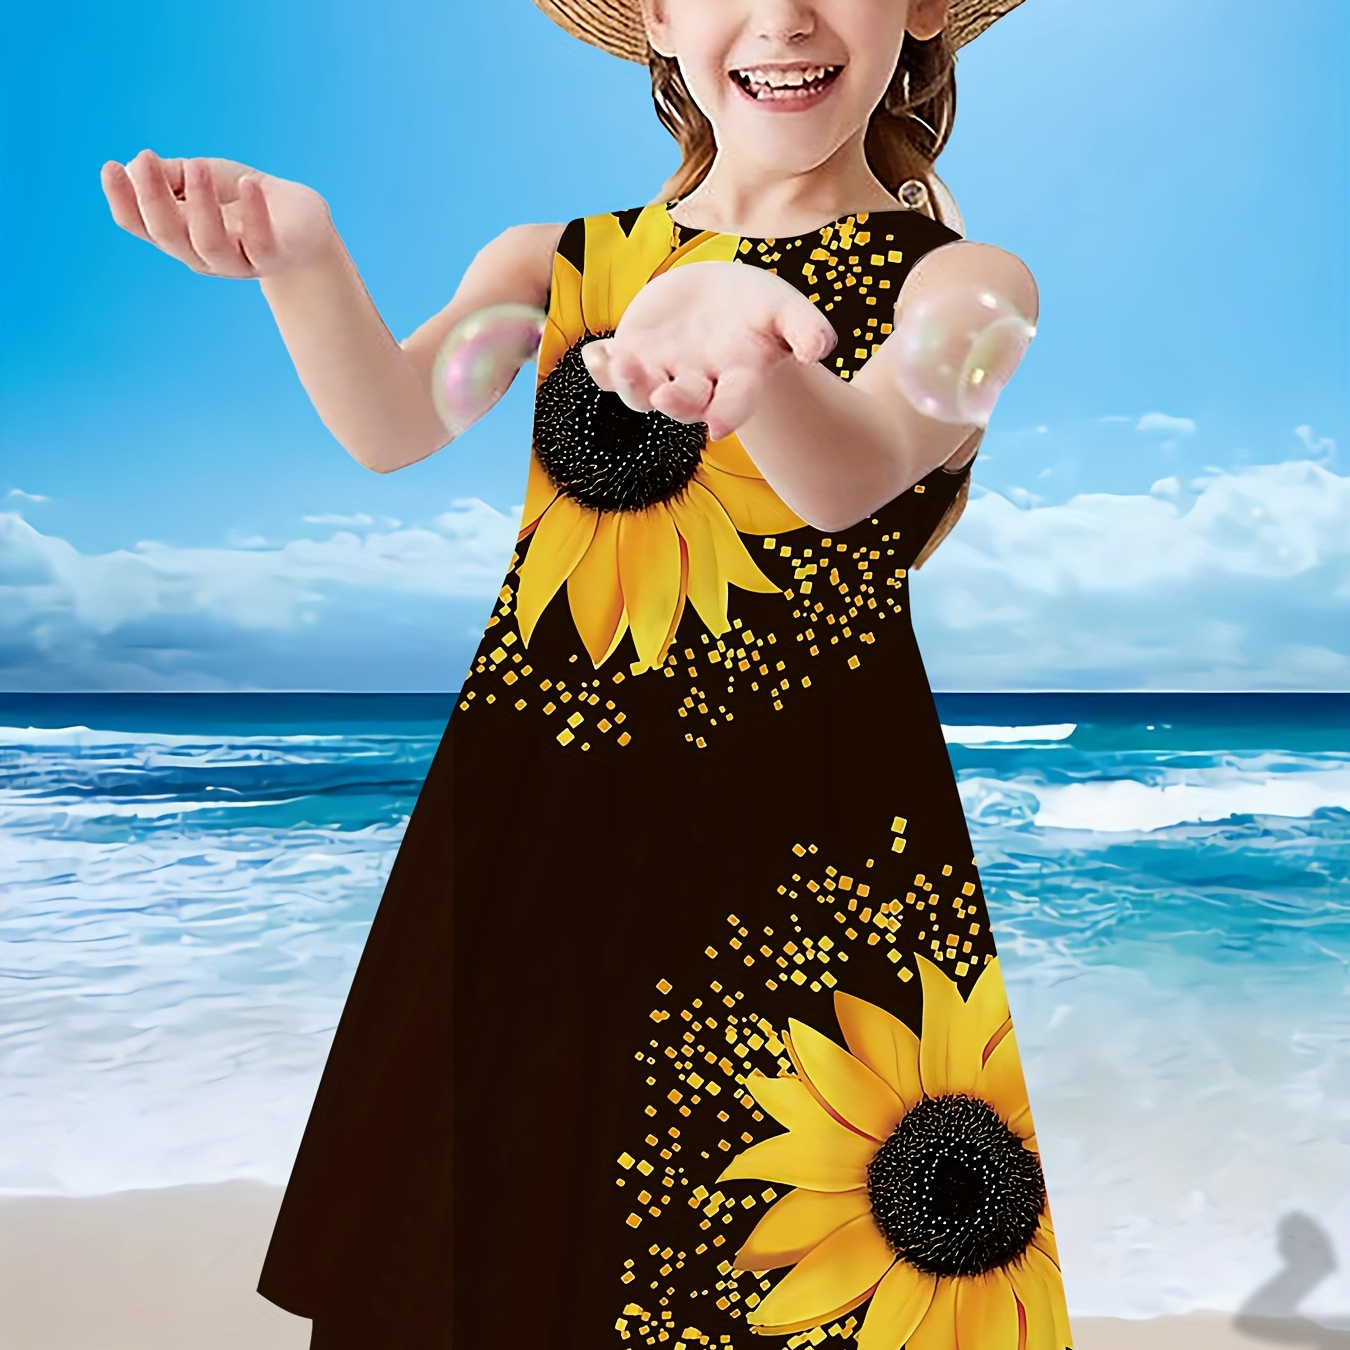 

Sunflowers Print Girls Creative Sleeveless Dress, Casual Loose Sundress For Holiday Summer Party